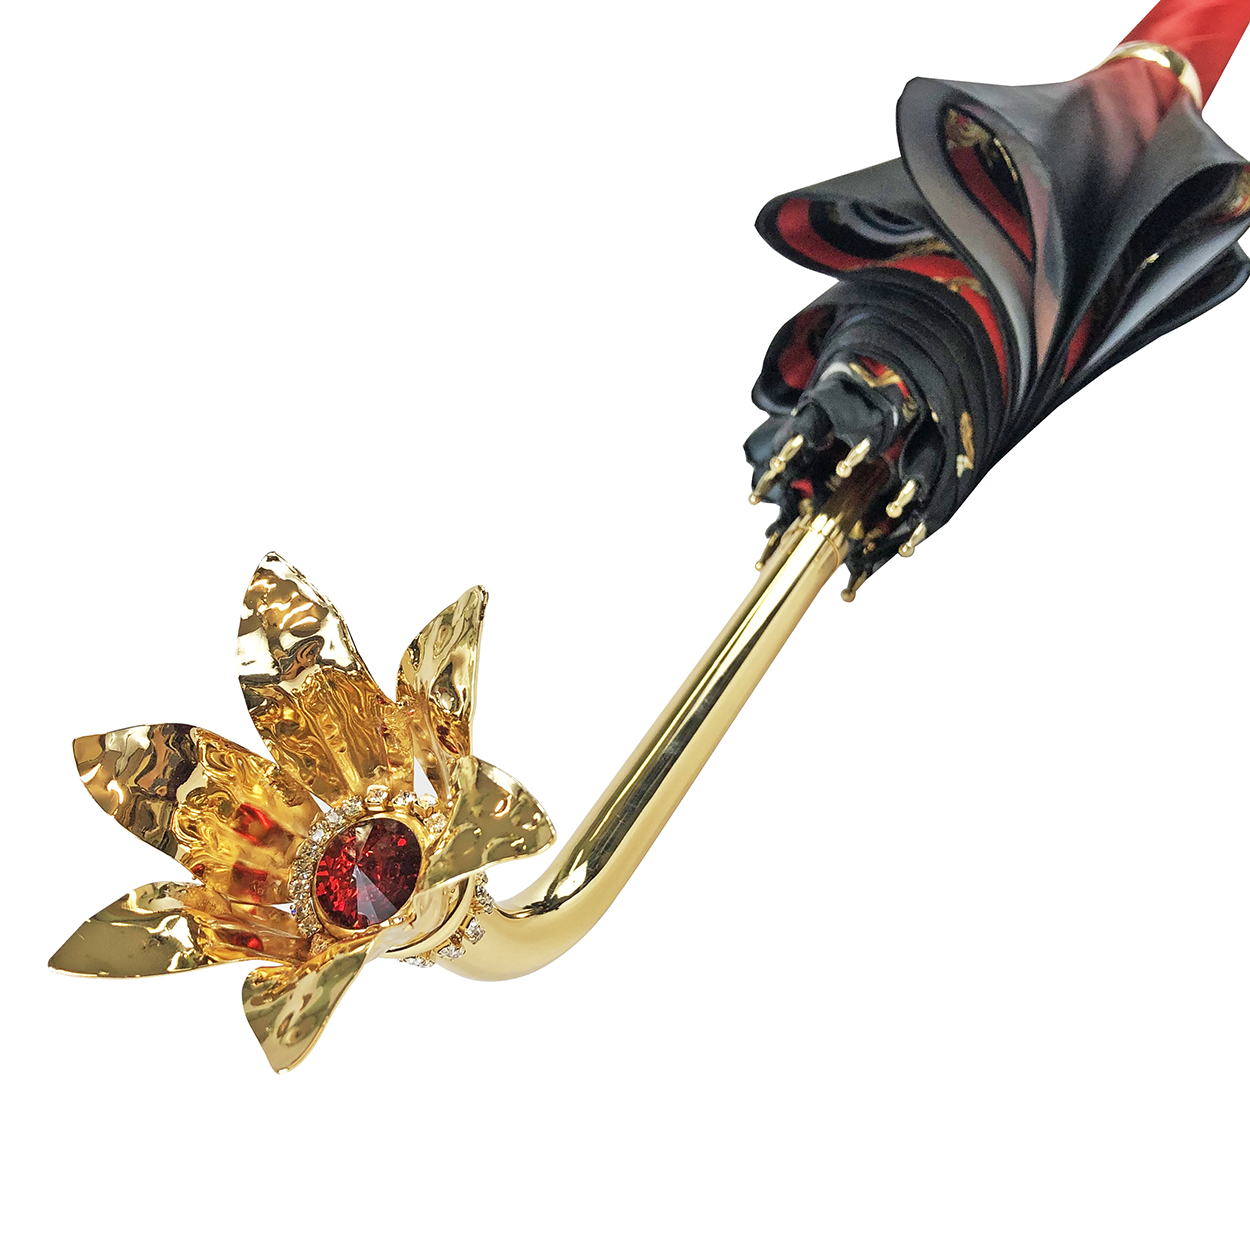 Marvelous Green and Red Umbrella with Goldplated flower